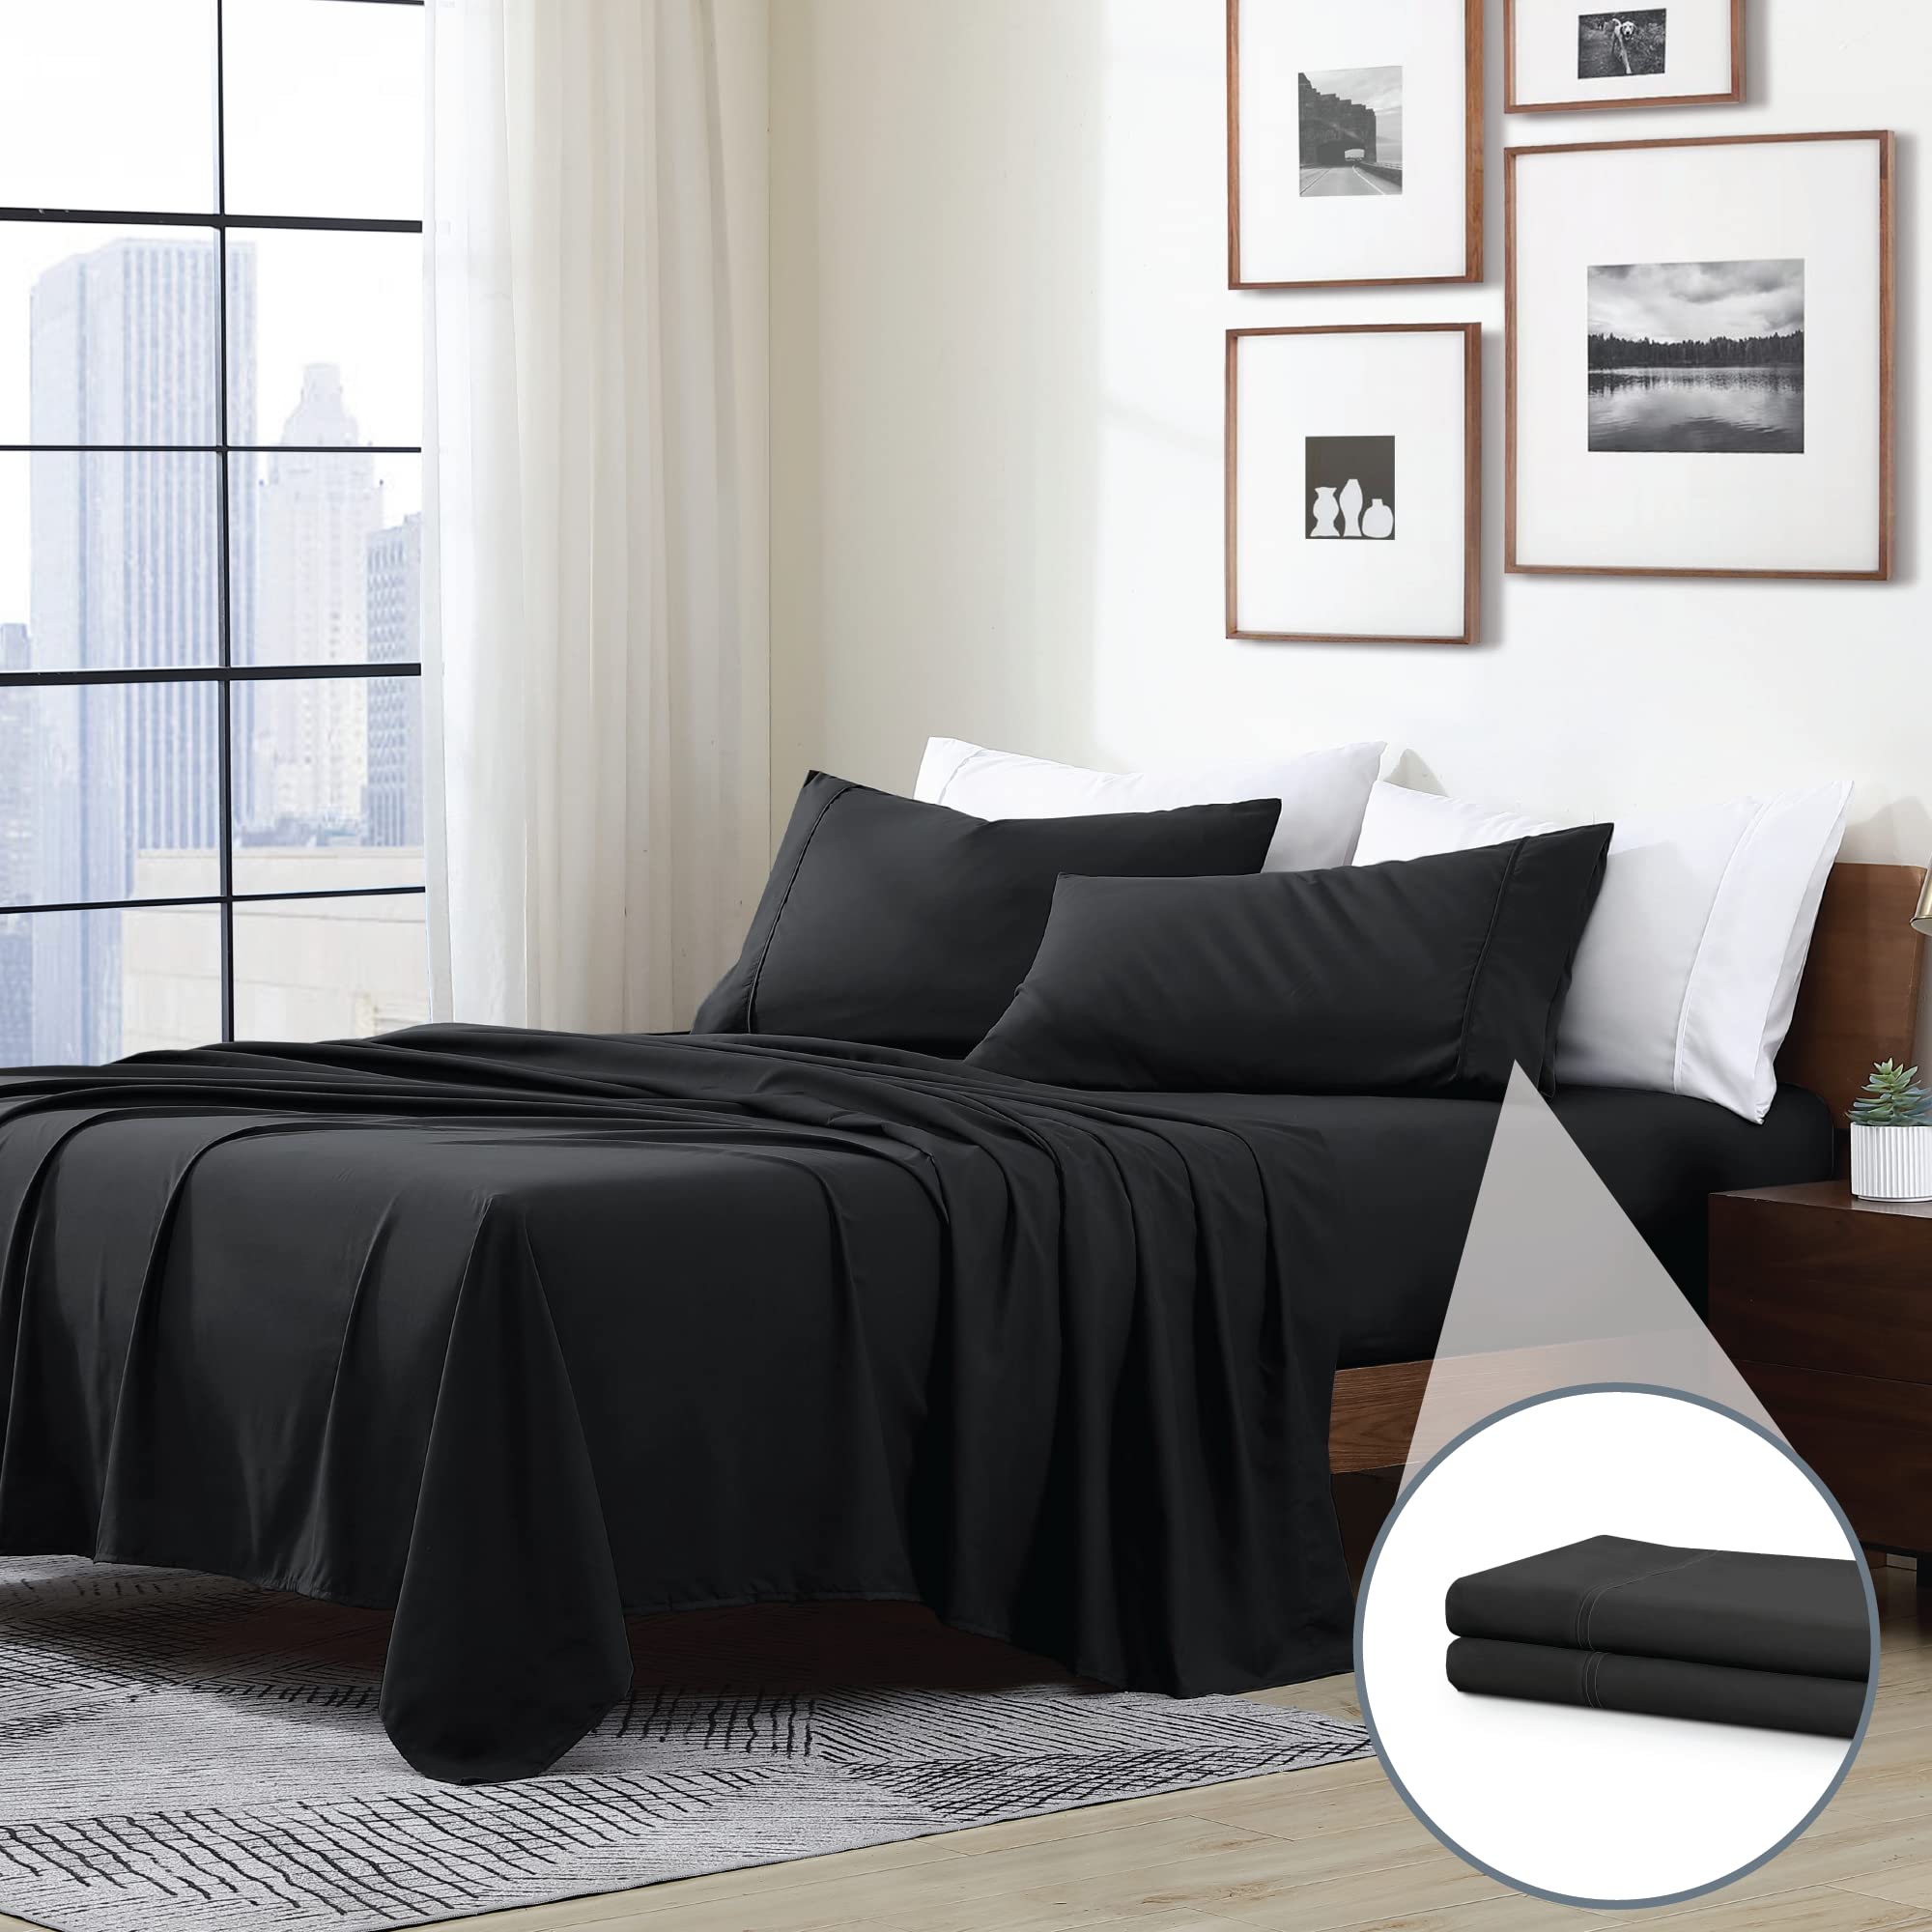 Book Cover Swift Home Twin 4-Piece Microfiber Sheet Sets (Includes 1 Bonus Pillowcase), Ultra-Soft Brushed - Extremely Durable - Easy Fit - Wrinkle Resistant, Twin, Black Black Twin